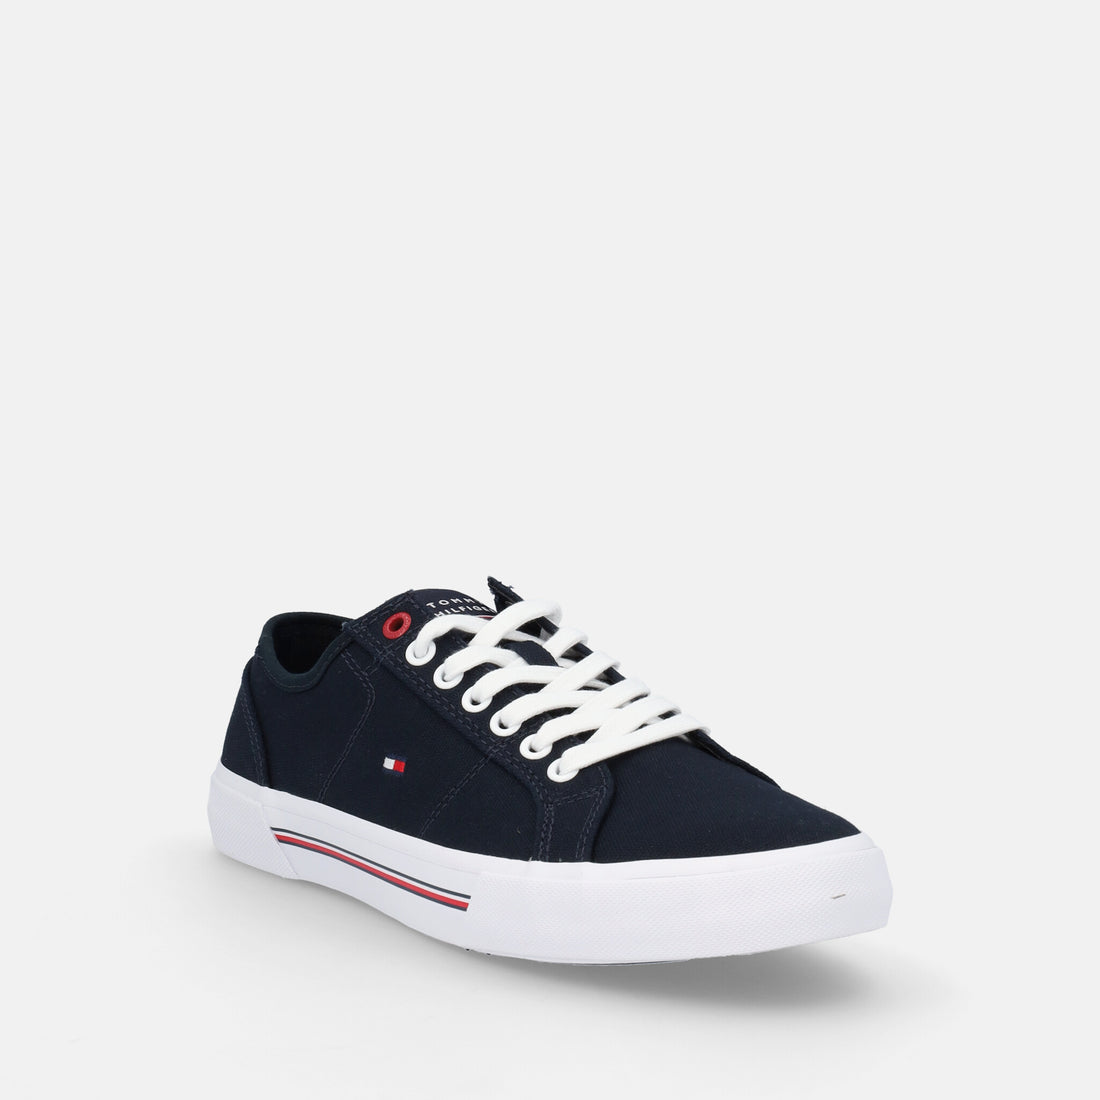 TOMMY HILFIGER CORE CORPORATE